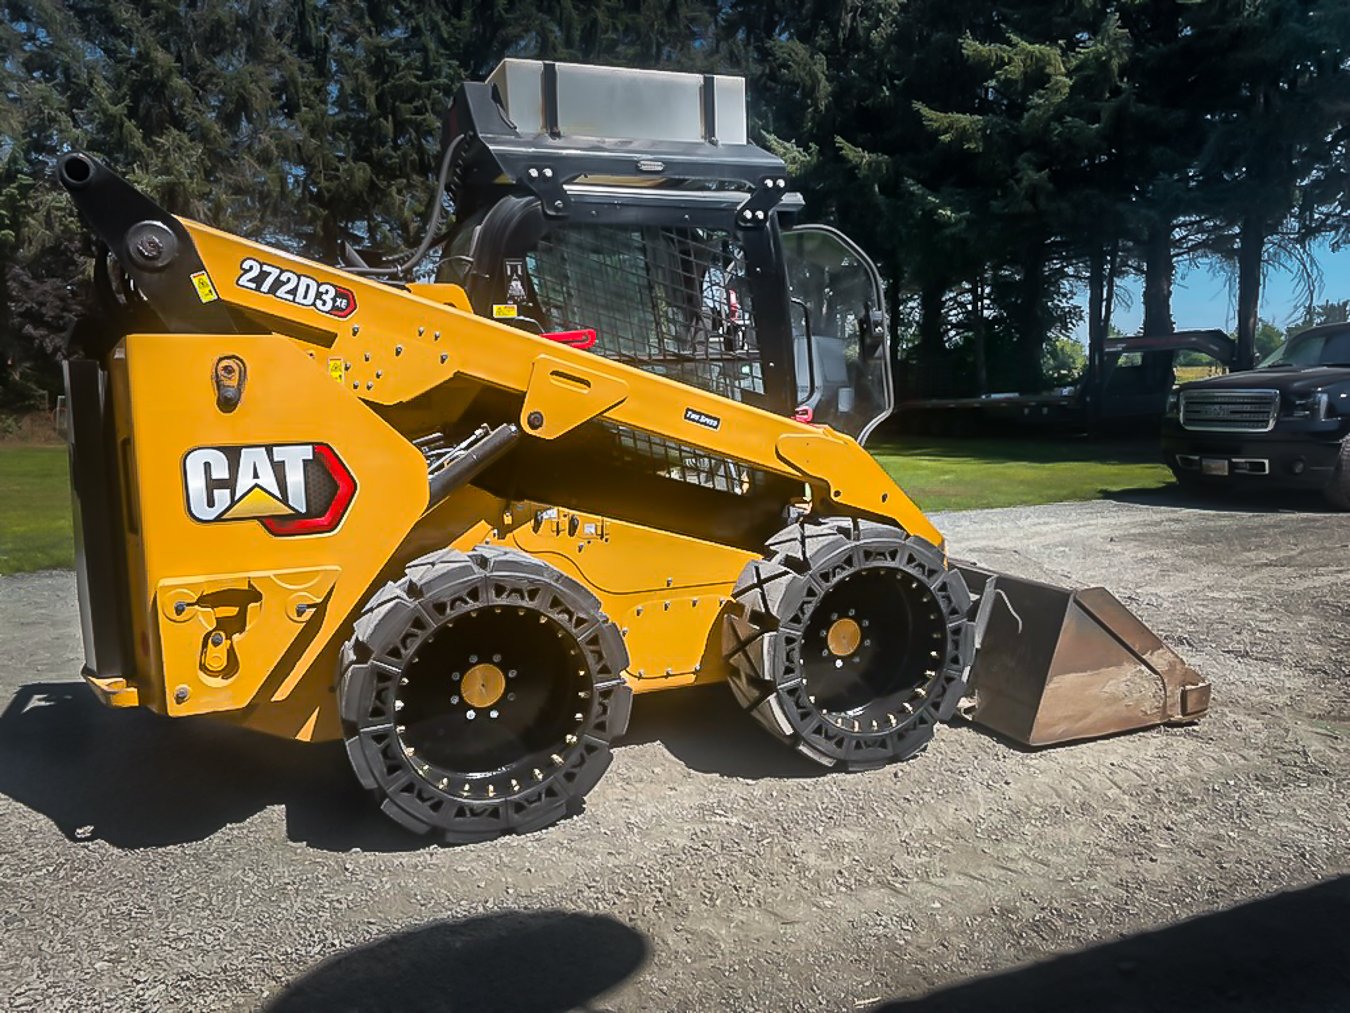 The image shows our EWRS-HS Bobcat tires on a CAT 272D3